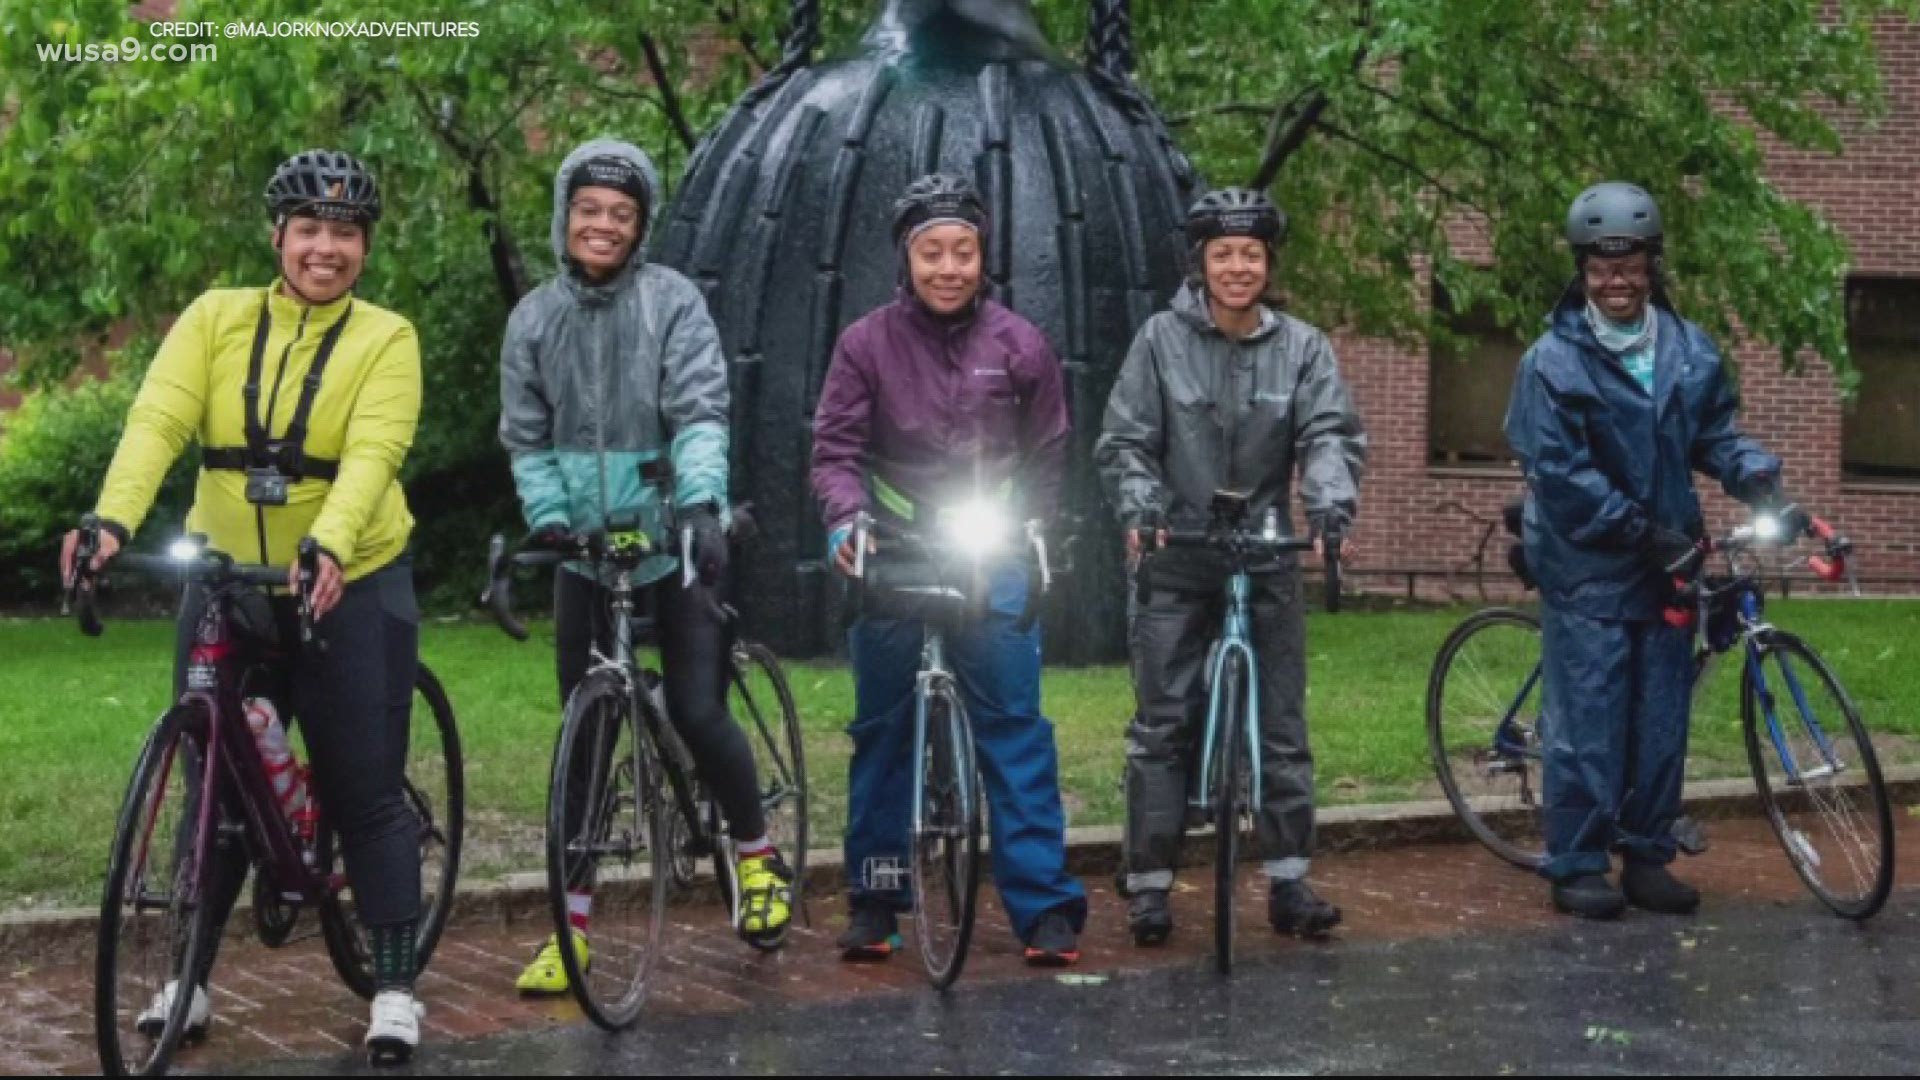 The group of women traveled 250 miles in 65 hours for a good cause.